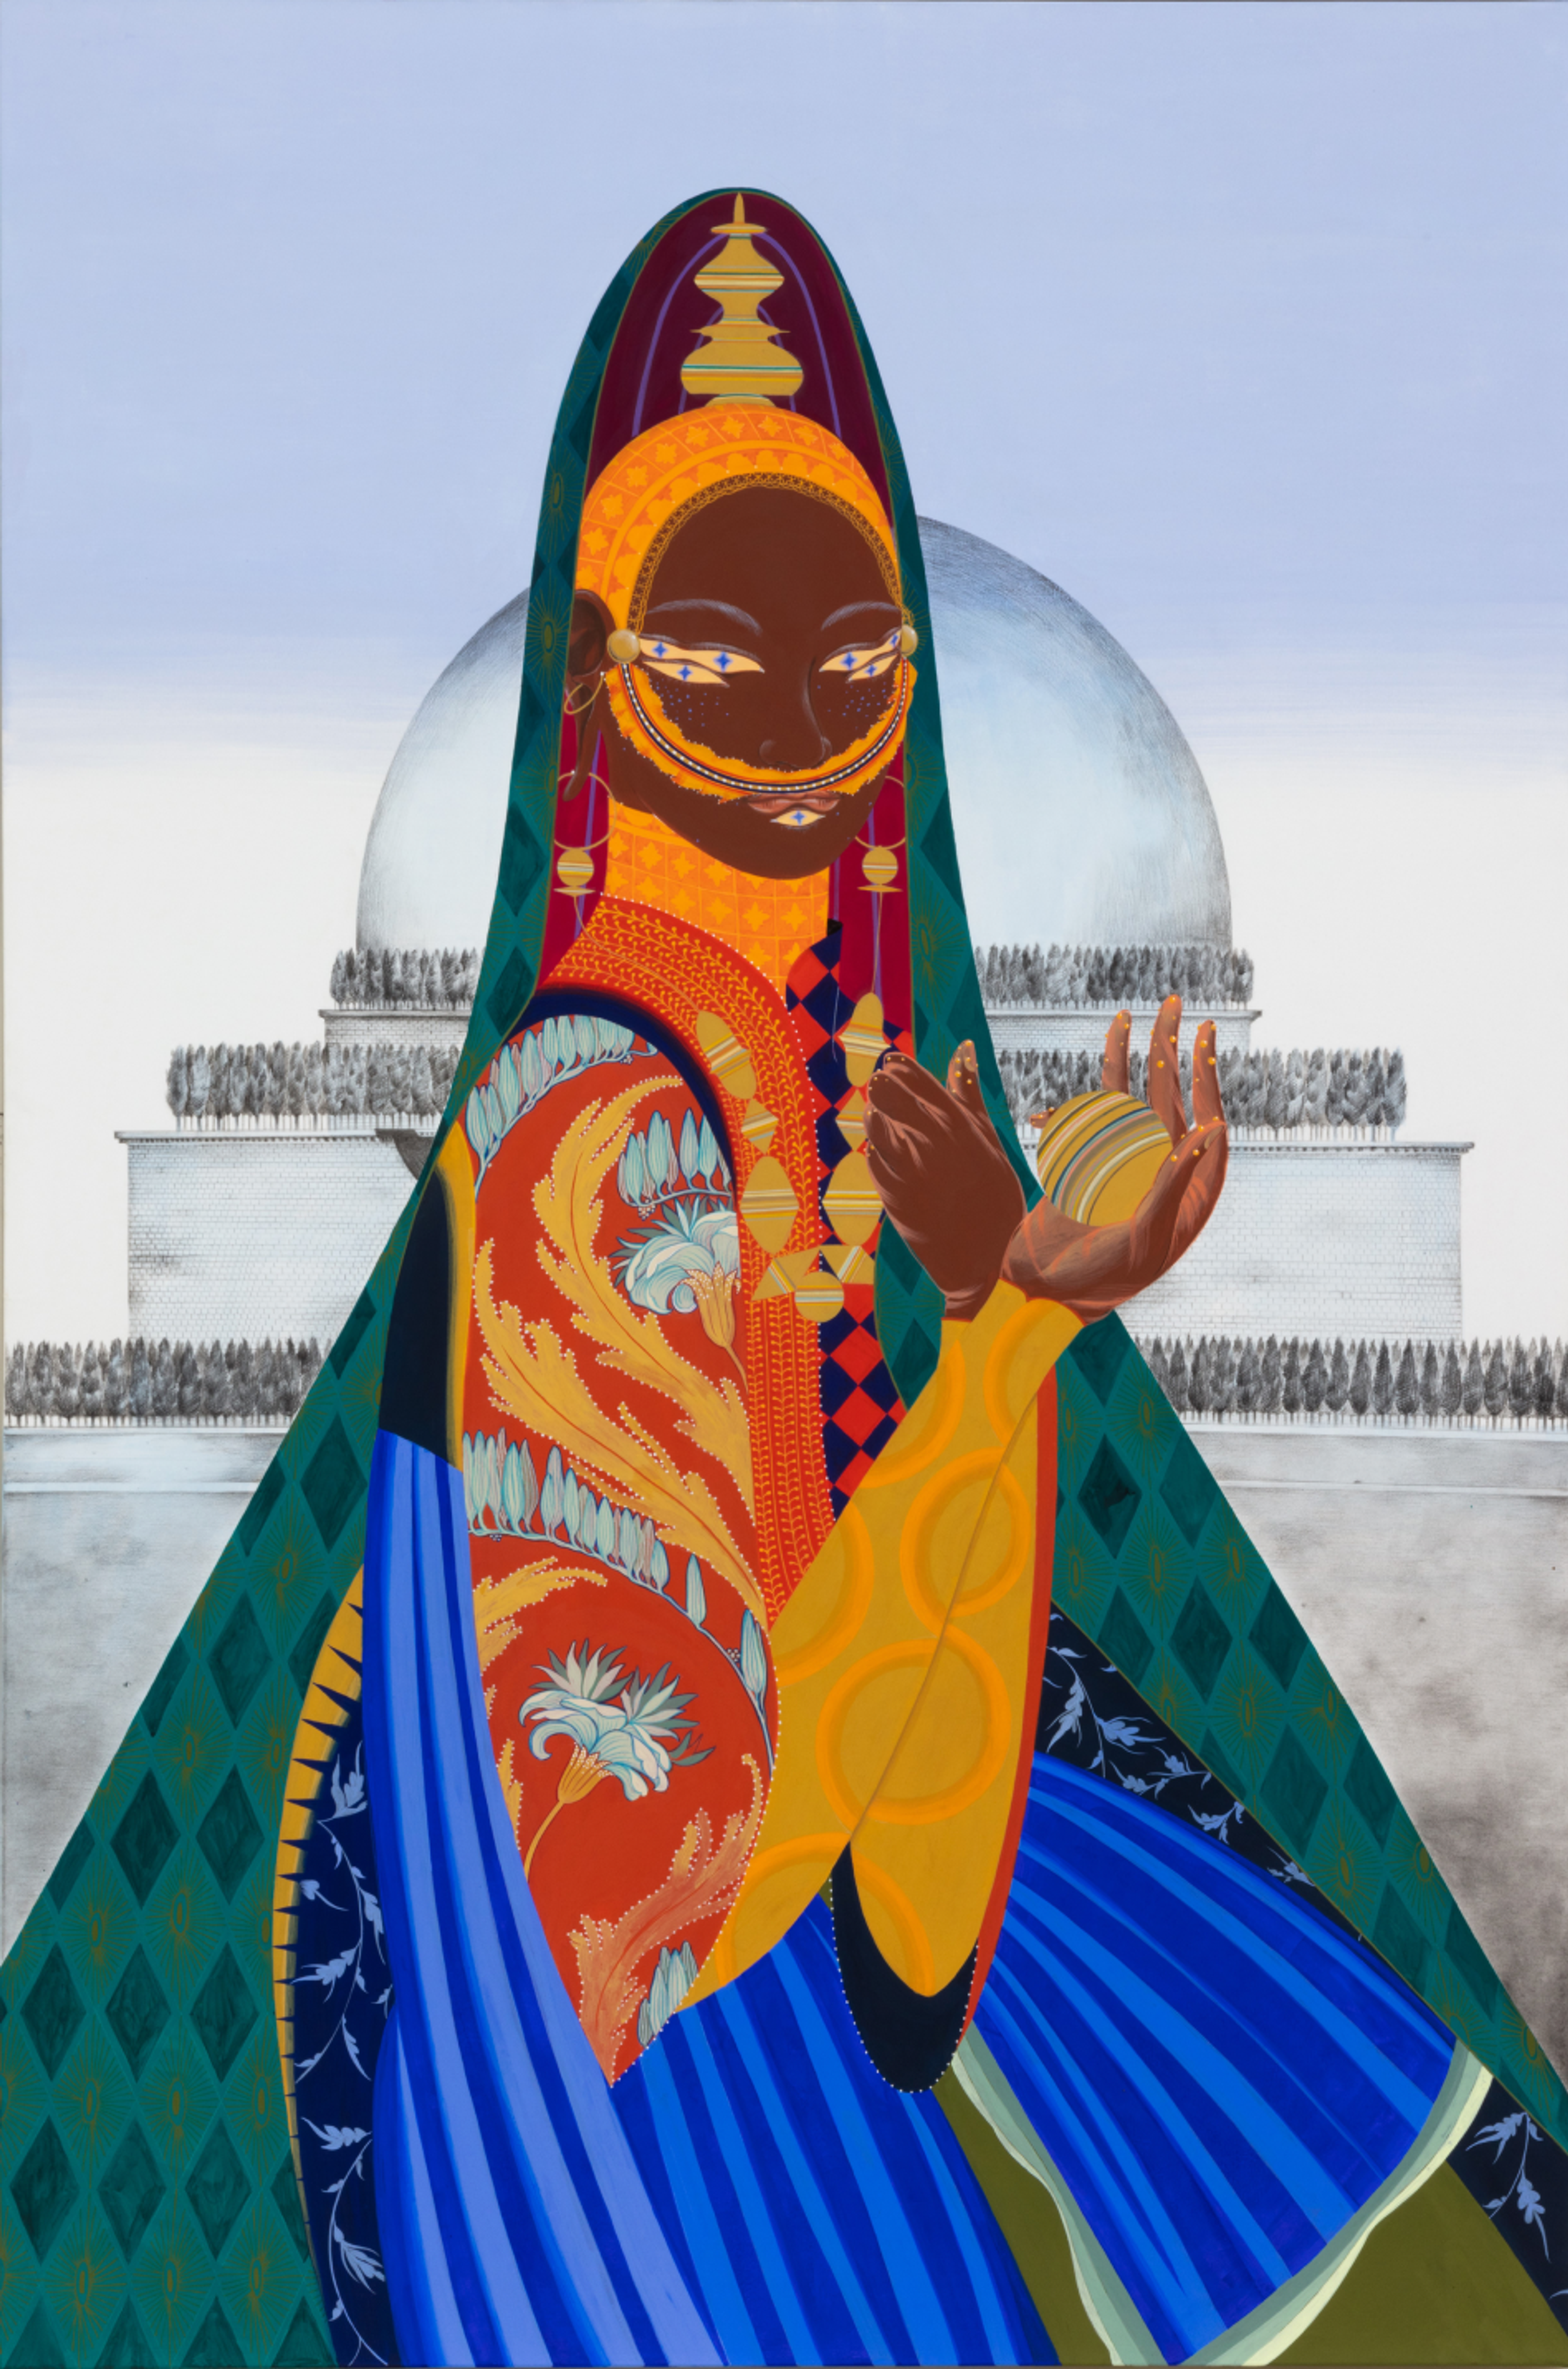 A mixed media depiction of an imaginary human covered in multi-coloured robes, holding a globe, sitting in front of a domed building.